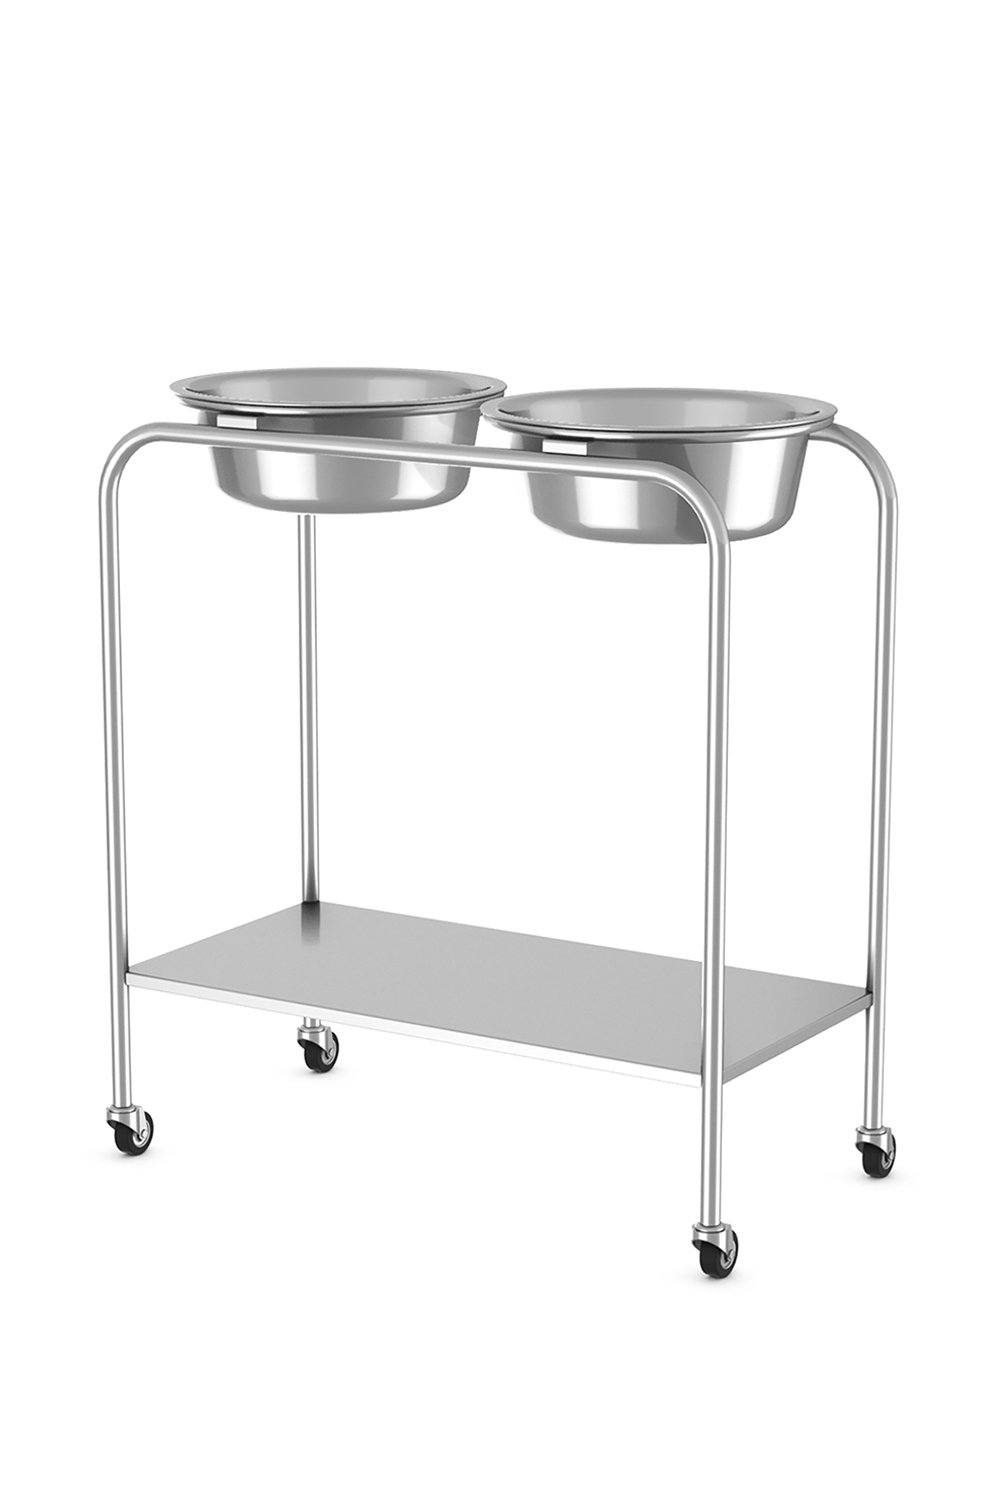 Solution Stand Stainless Solutions Acart 28"D x 14"W x 34"H 9-1/2 Quart Basins (2) with Lower Shelf 